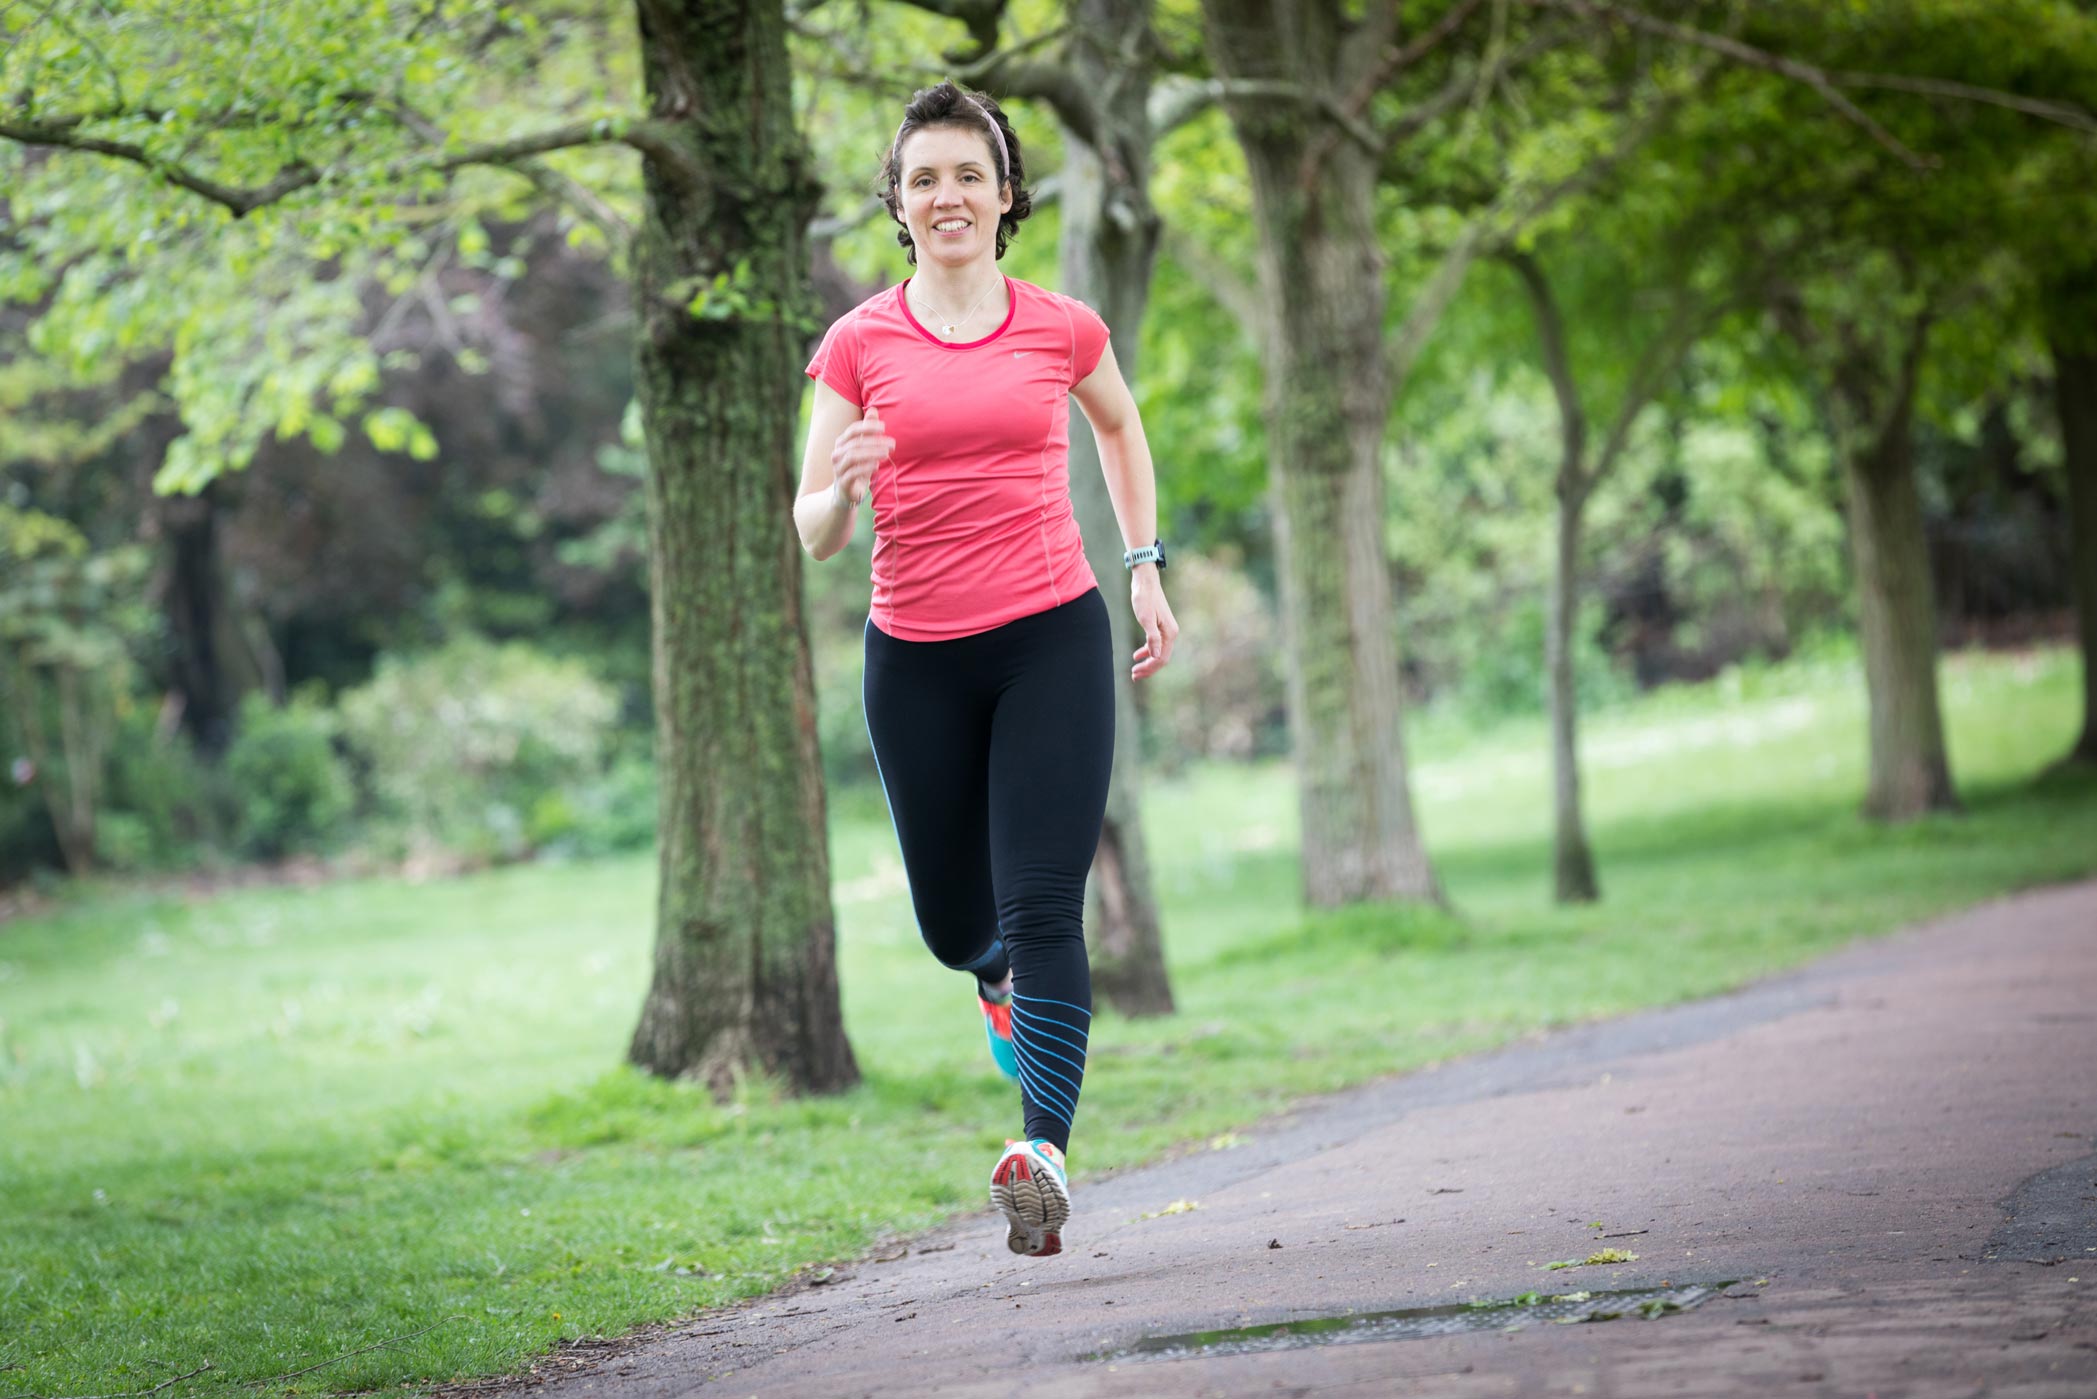 A female personal trainer runs in the park during a fitness personal branding photo shoot in London